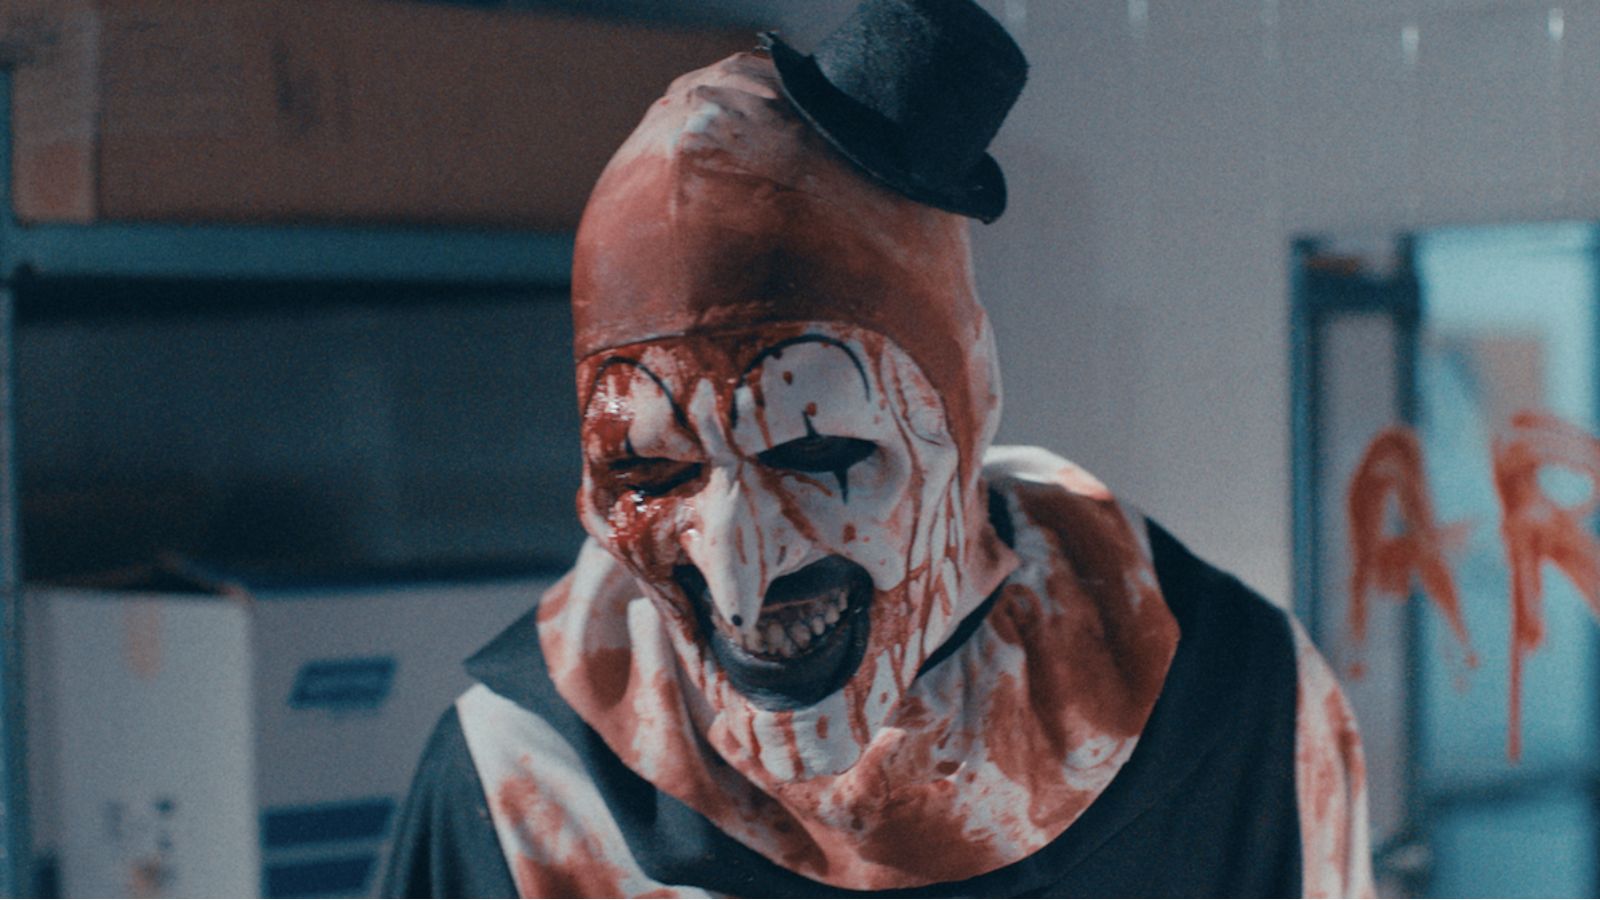 Terrifier 2 causes vomits and fainting